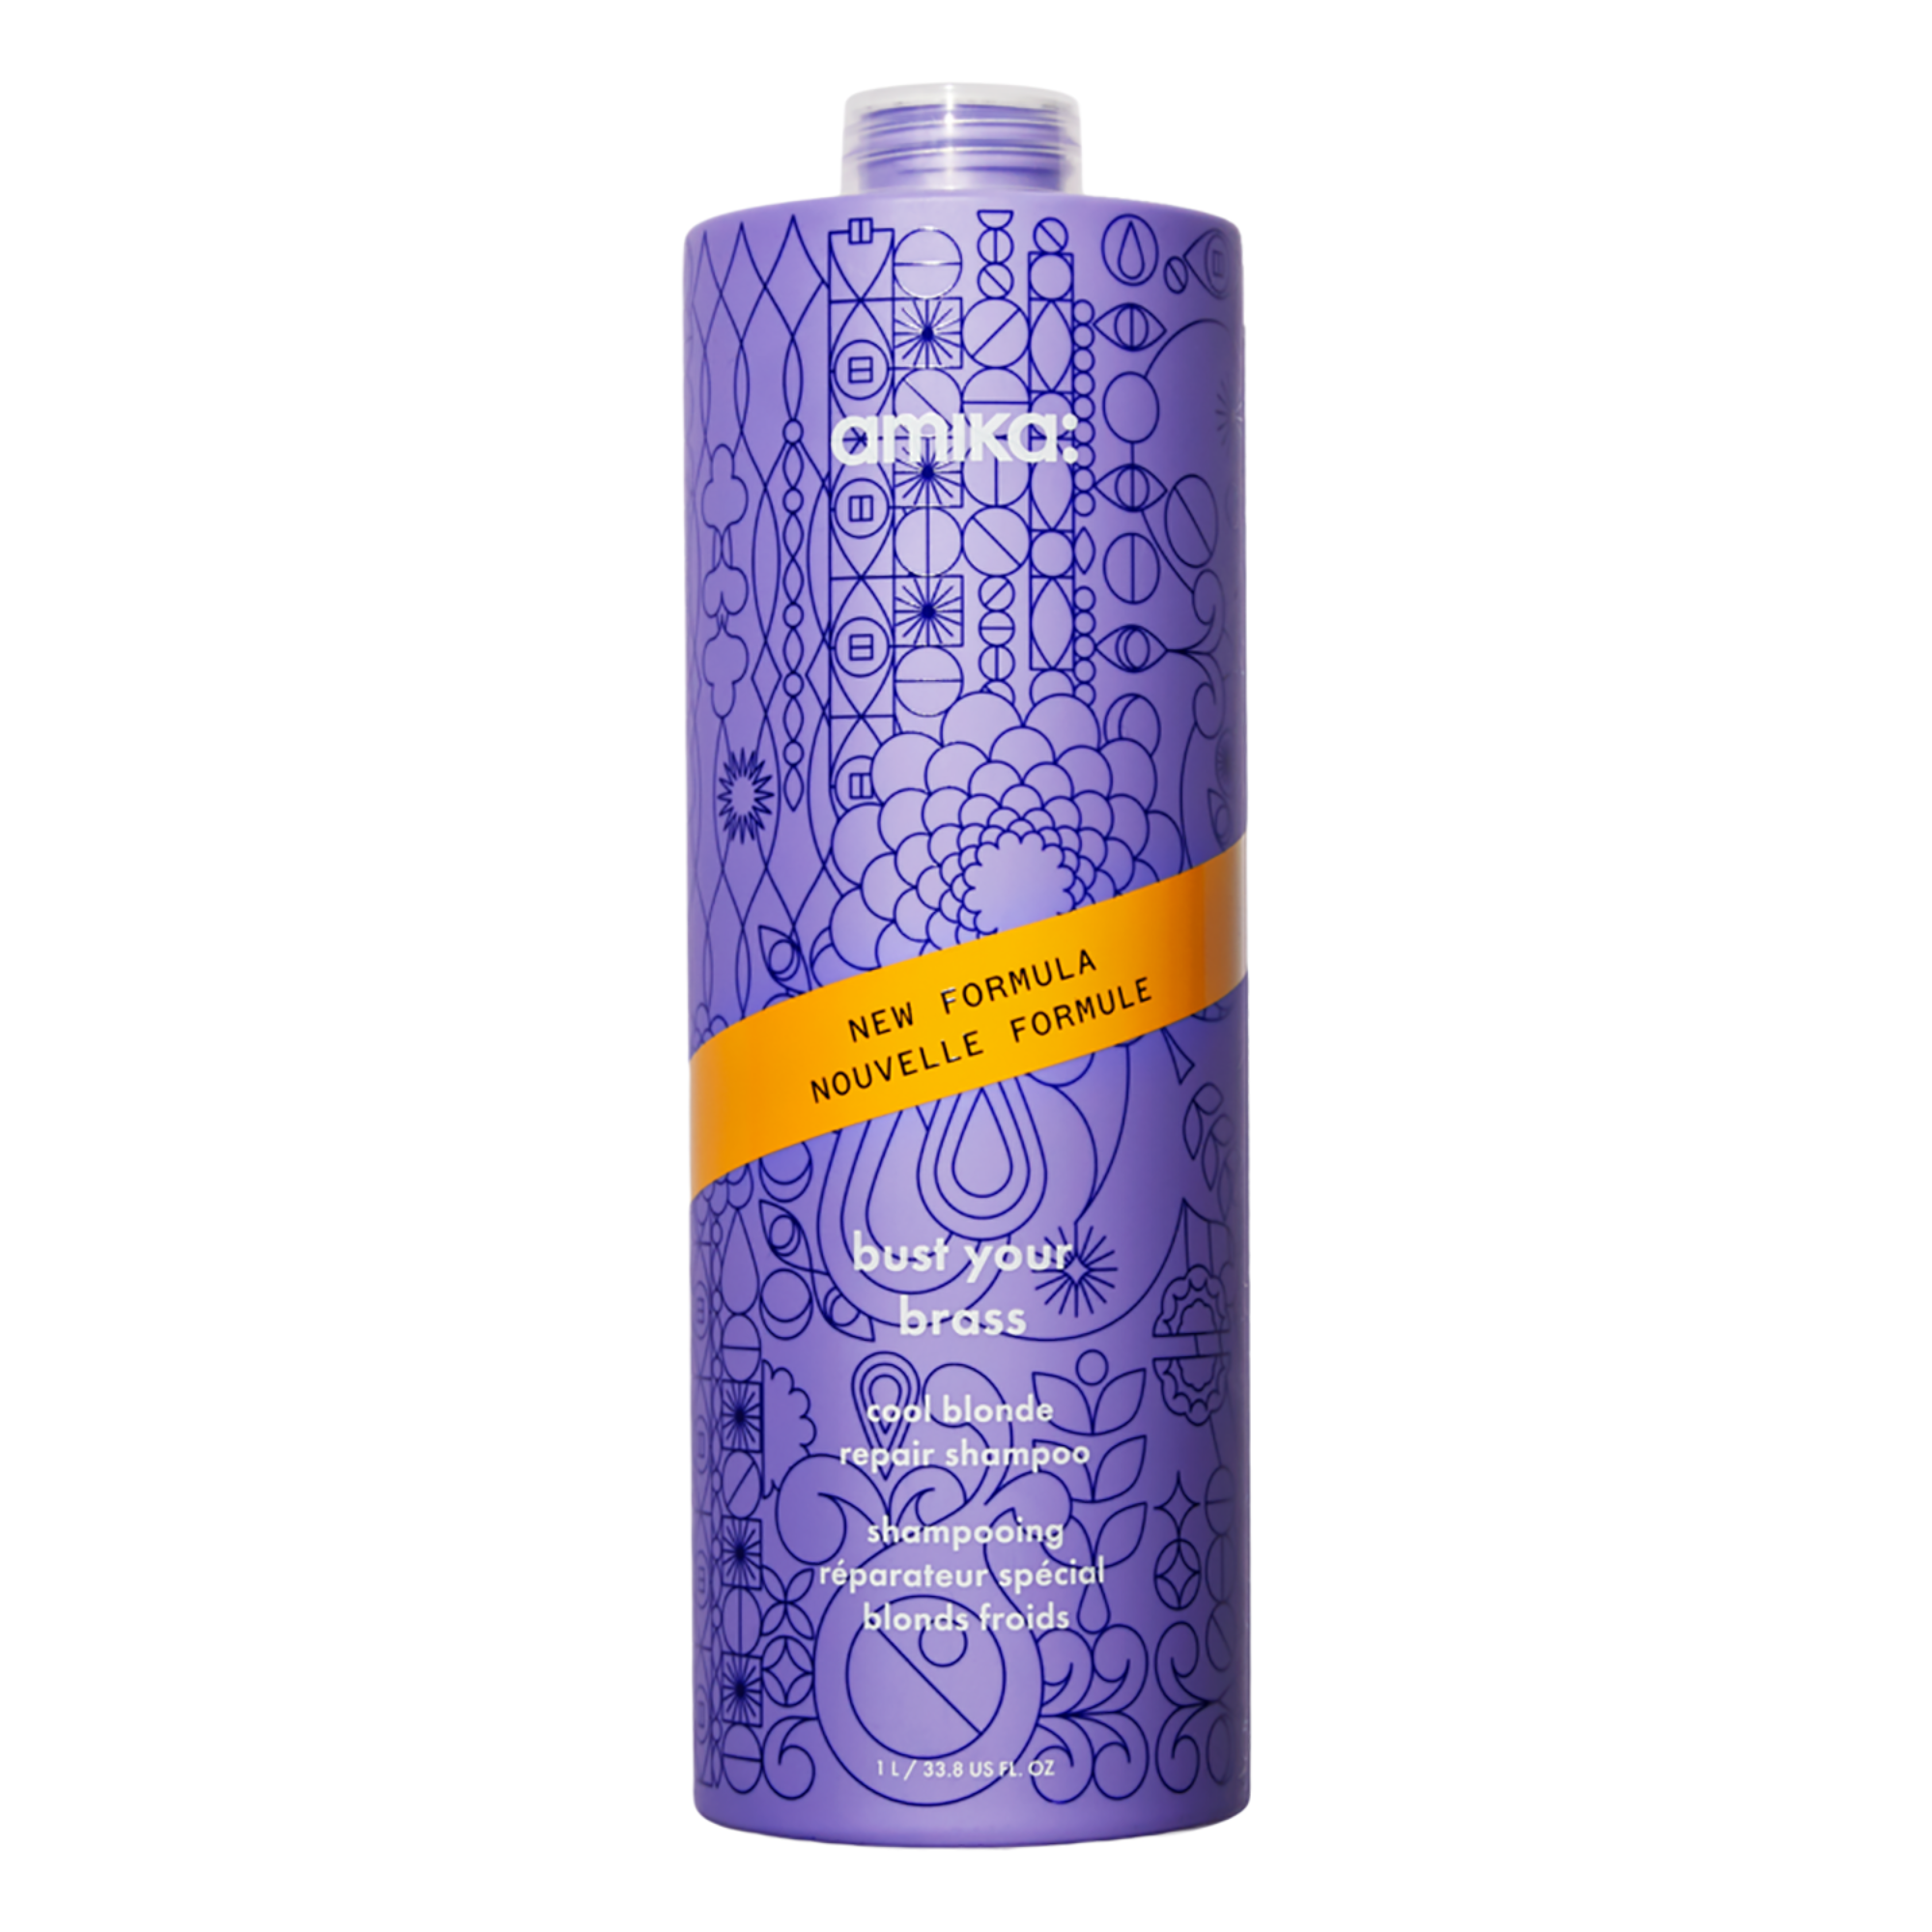 Amika Bust Your Brass Cool Blonde Shampoo / 33OZ